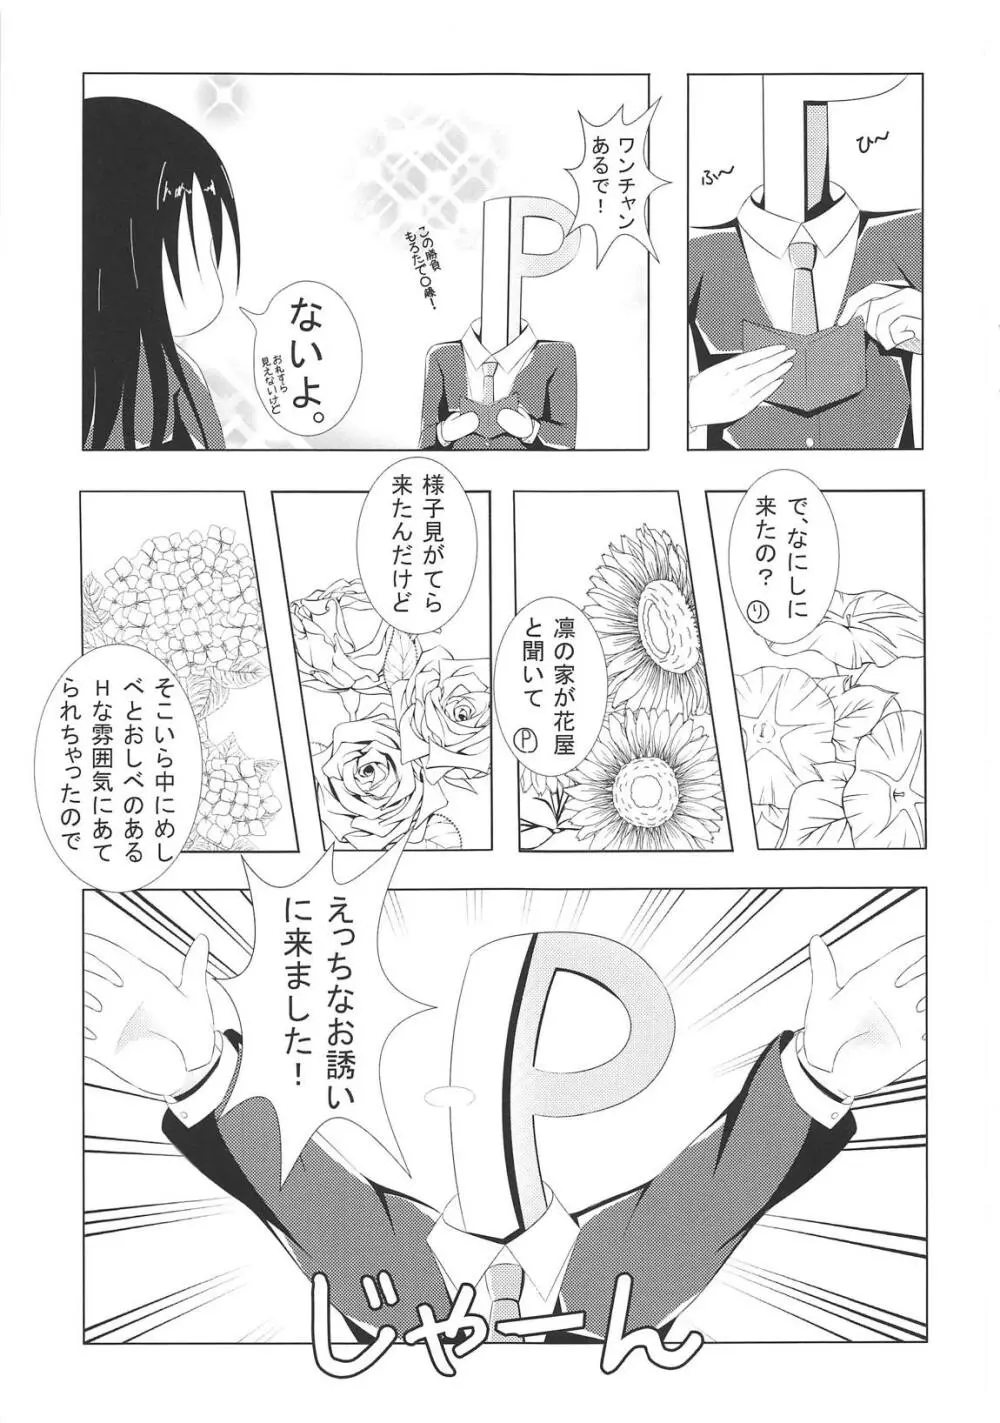 FLOWER GIRL Page.4